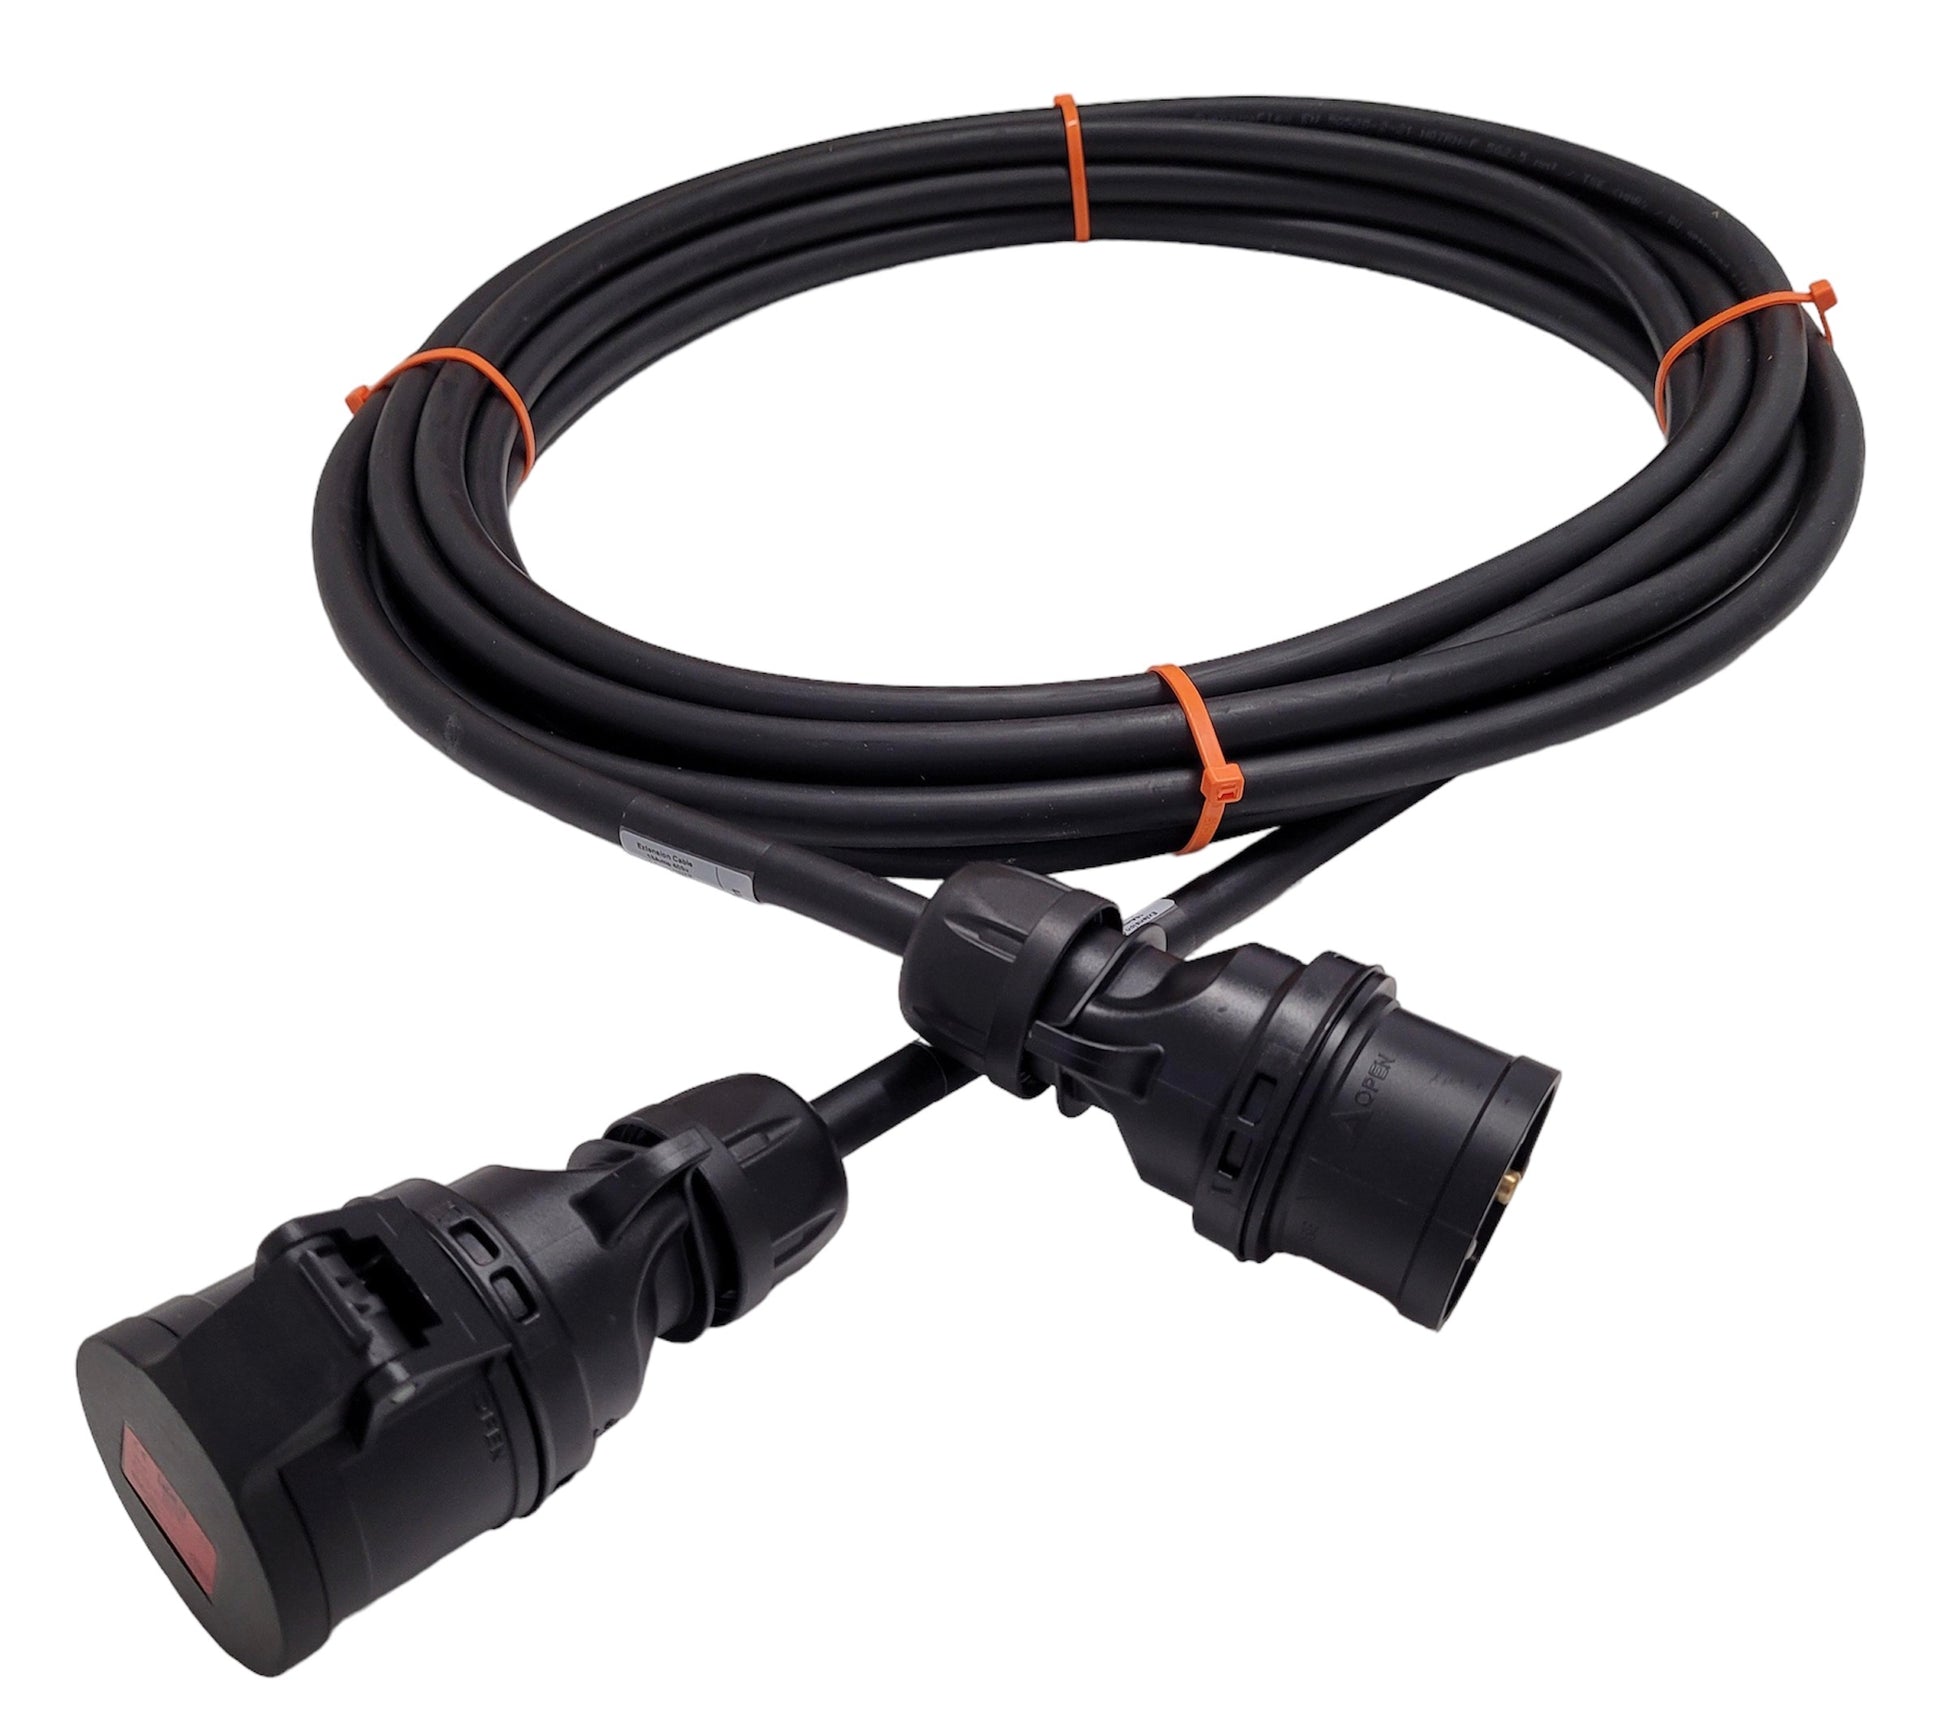 https://www.giraffecontrolsltd.com/products/25m-power-extension-cable-16amp-400v-2-5mm-ho7r-5-pin-ip44